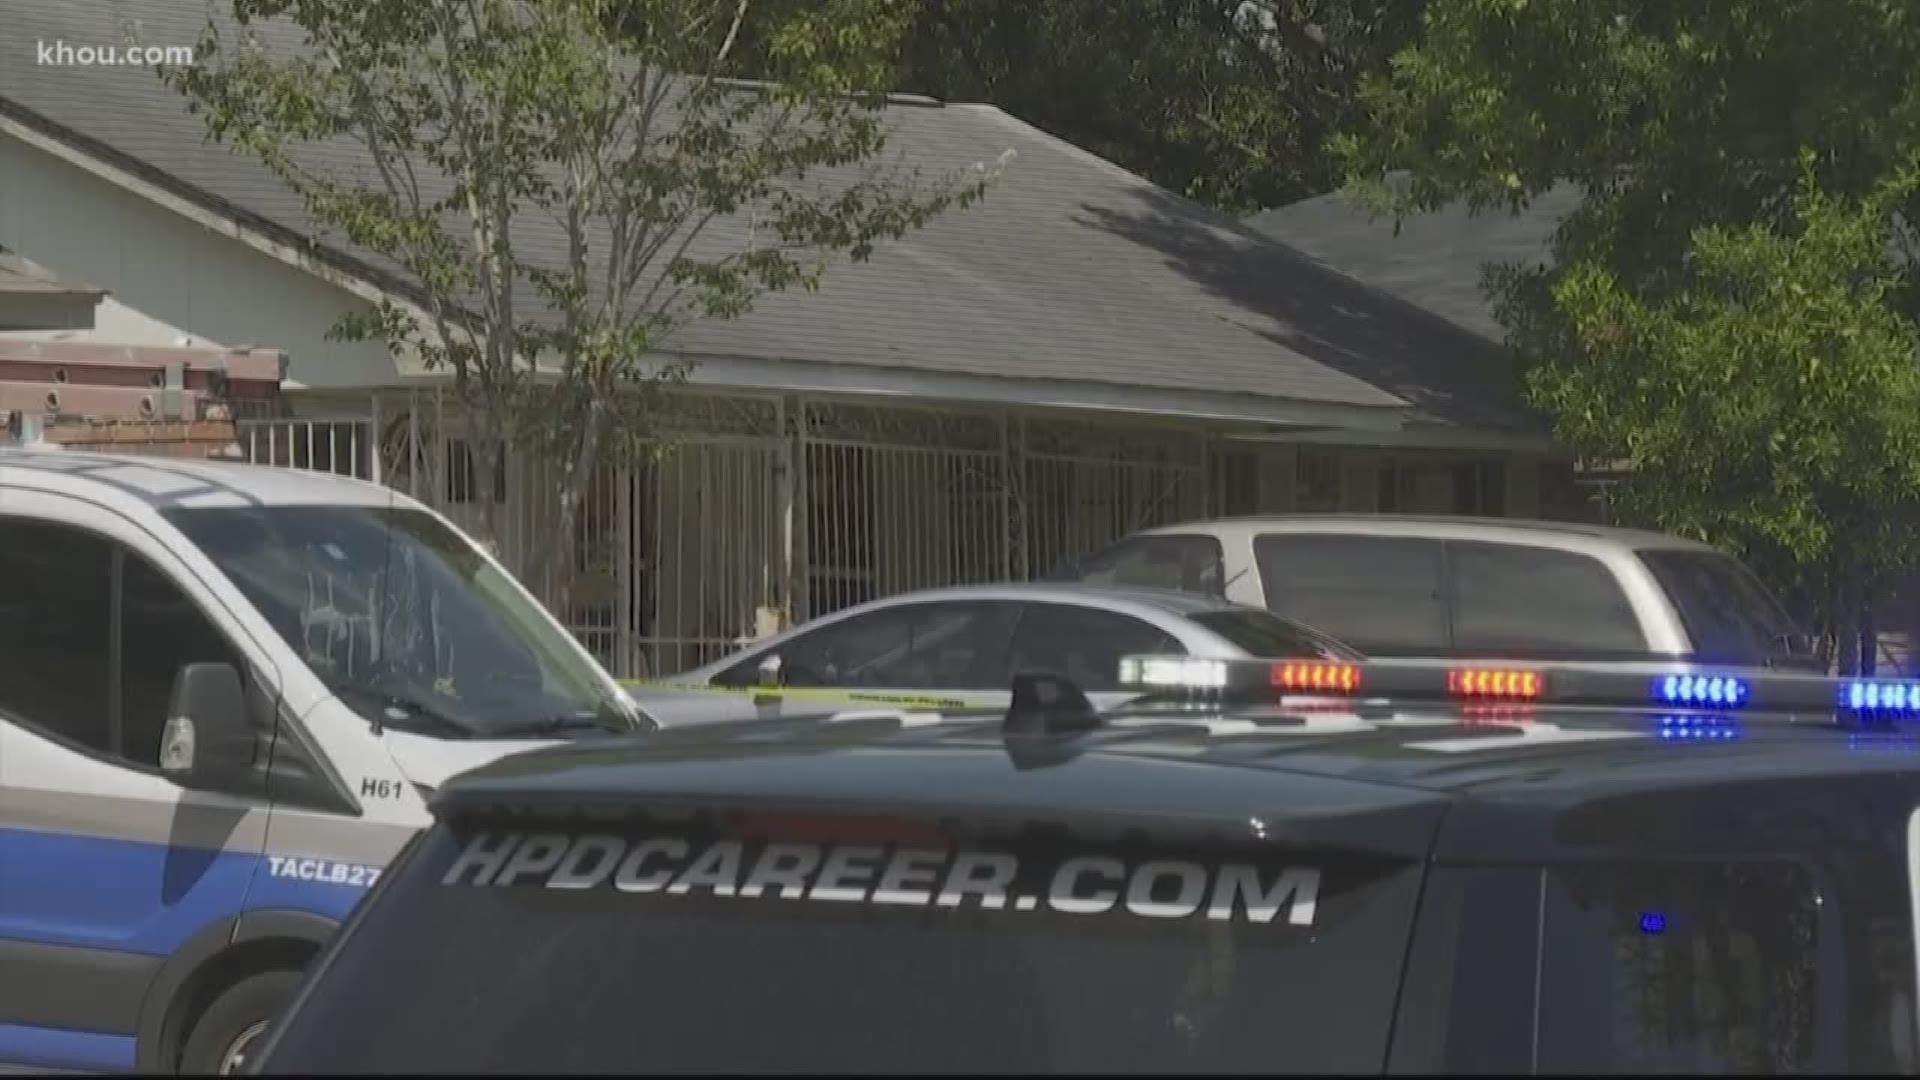 A child custody dispute turned deadly Monday afternoon in southwest Houston.